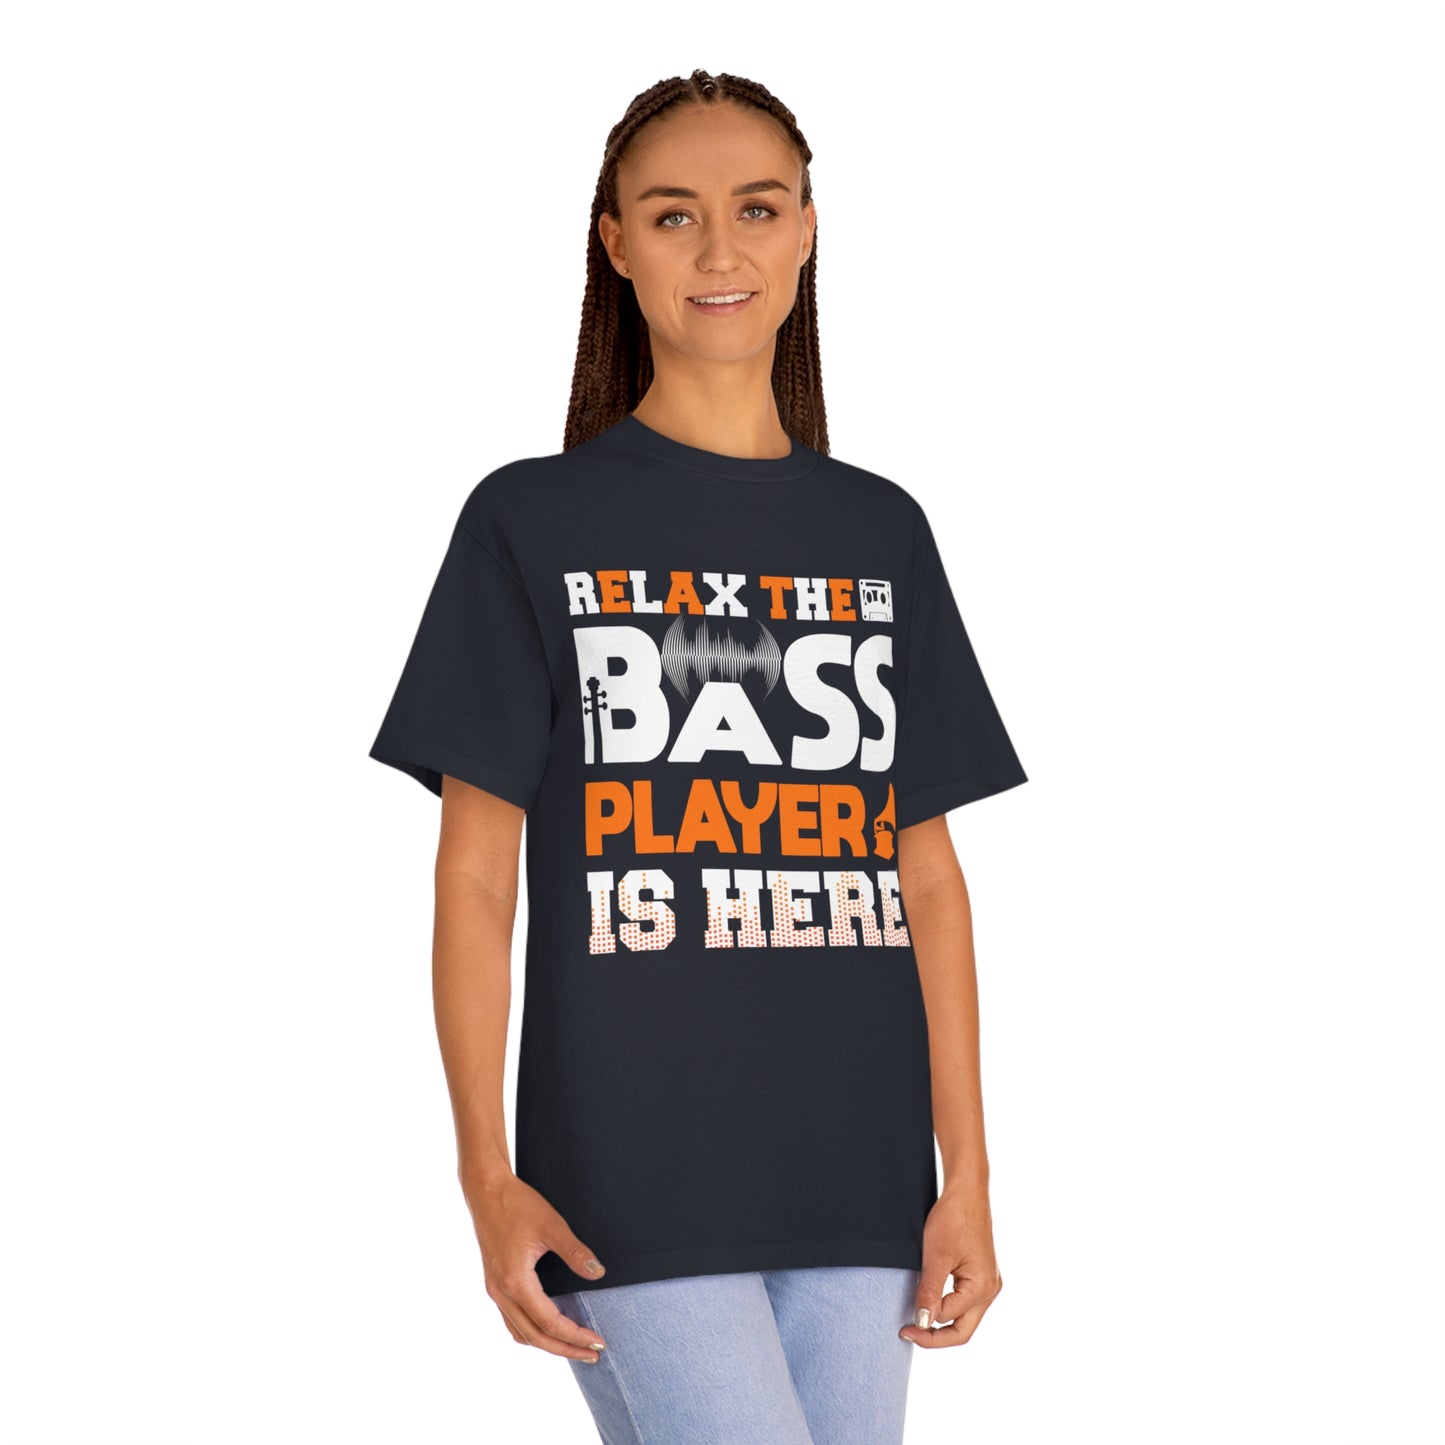 Relax the bass player is here Unisex Classic Tee